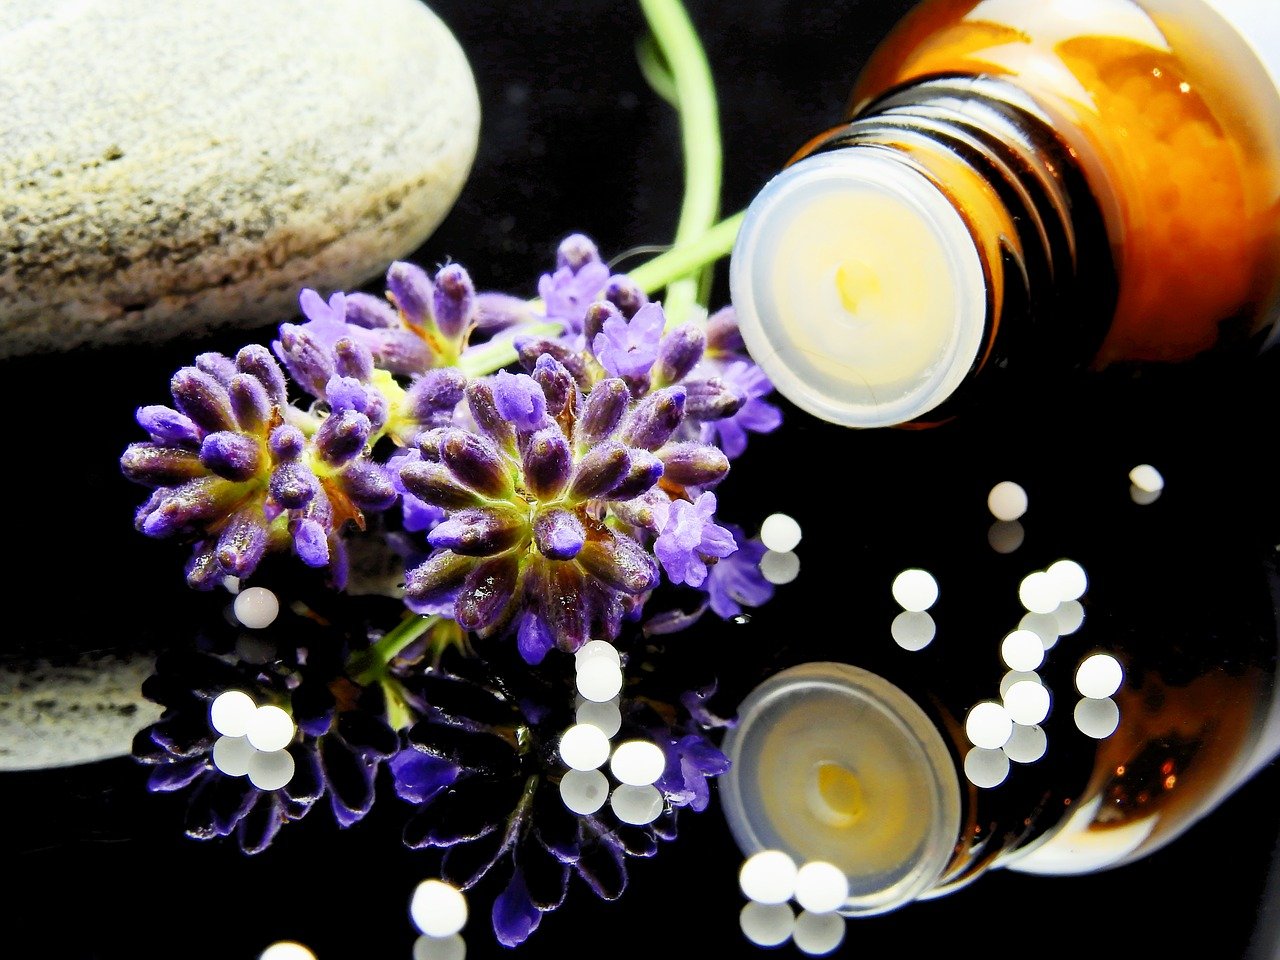 Take Charge of Your Health and Wellbeing With Naturopathy